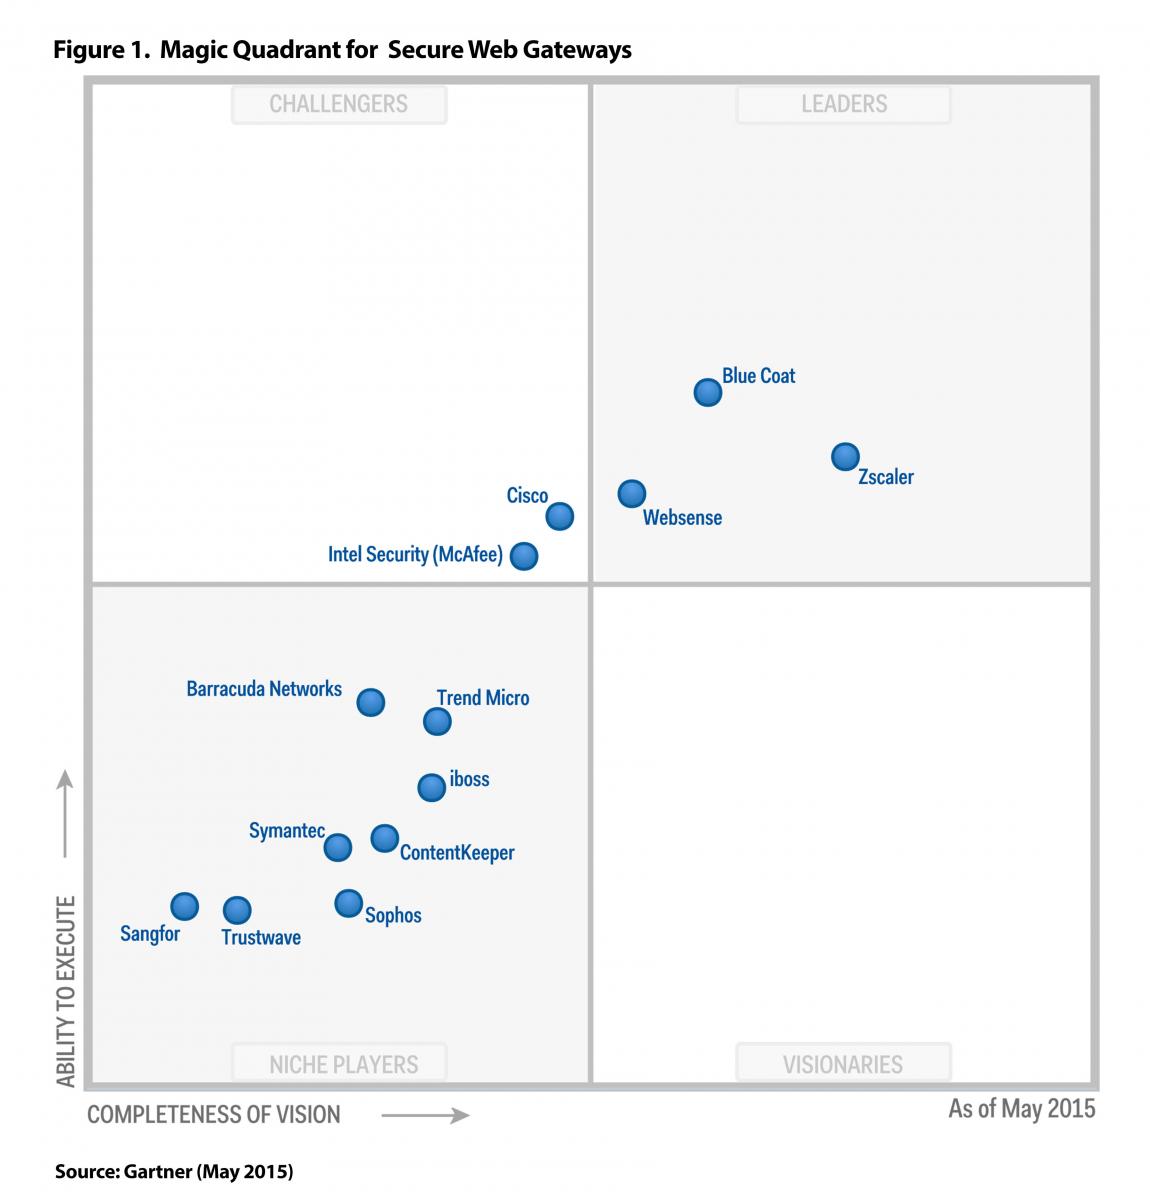 Zscaler Positioned as a Leader in Gartner Magic Quadrant for Secure Web